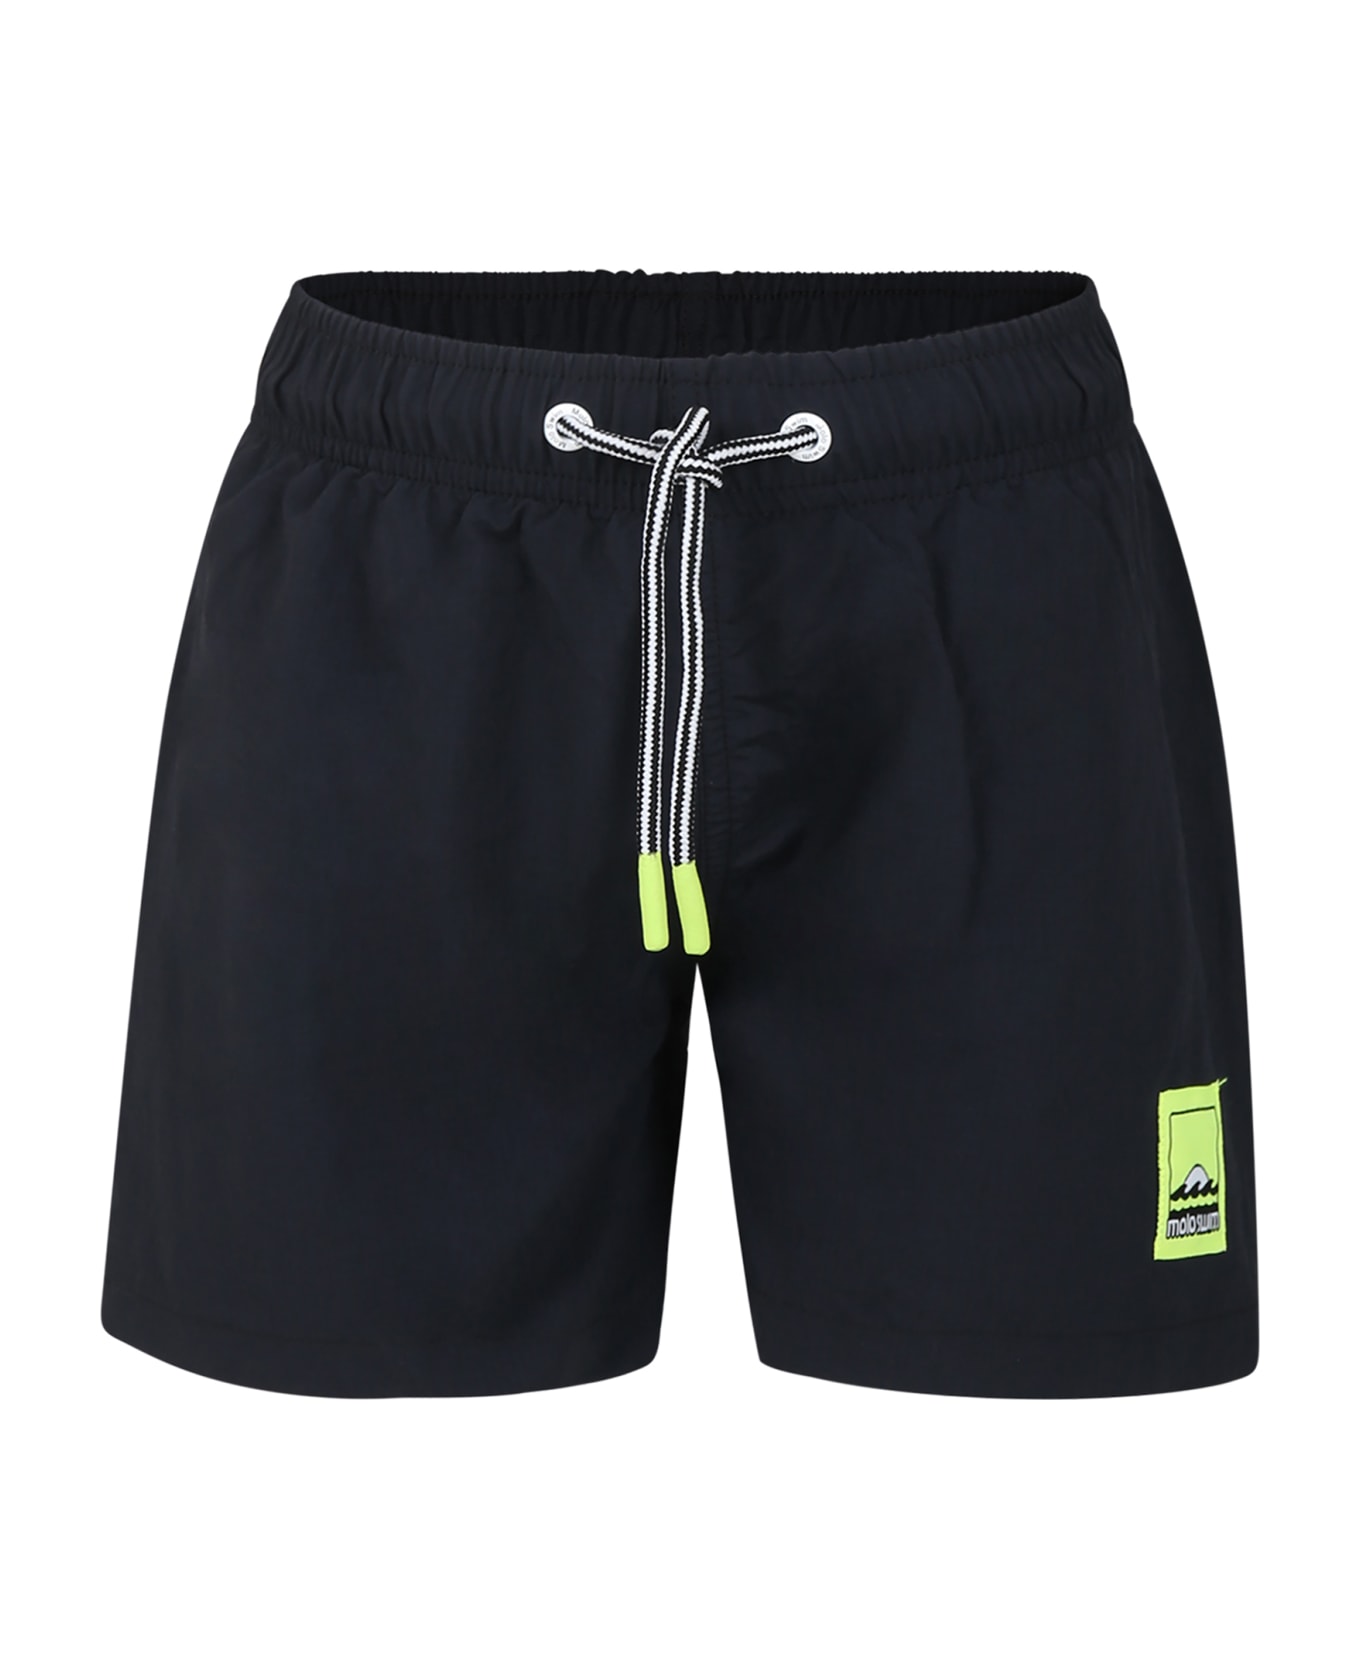 Molo Black Swimsuit For Boy With Logo - Black